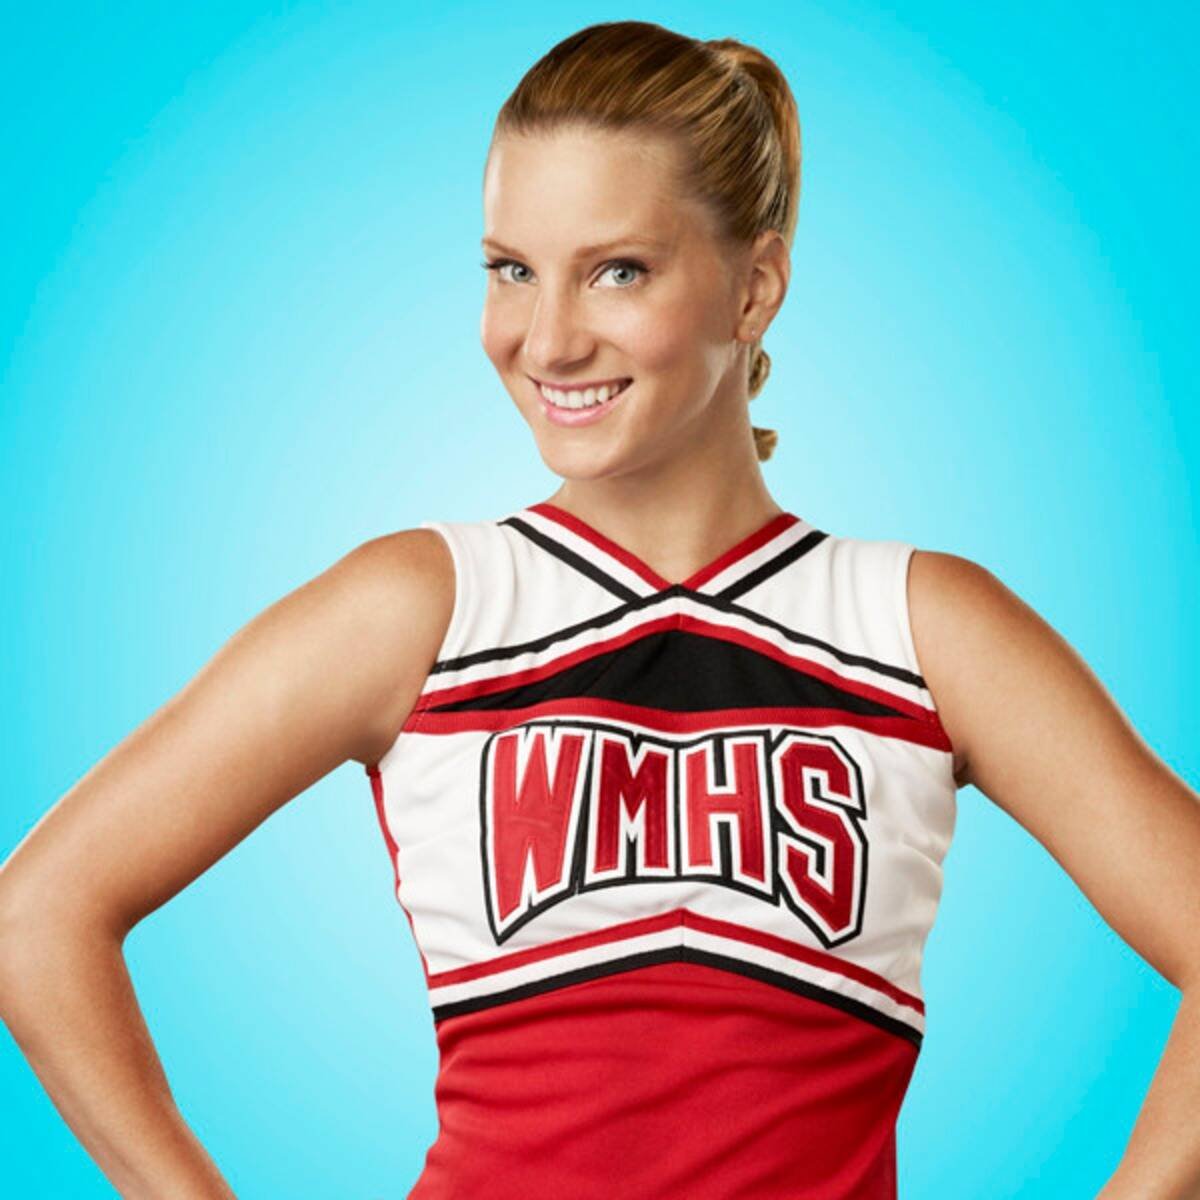 Best Brittany S. Pierce song?